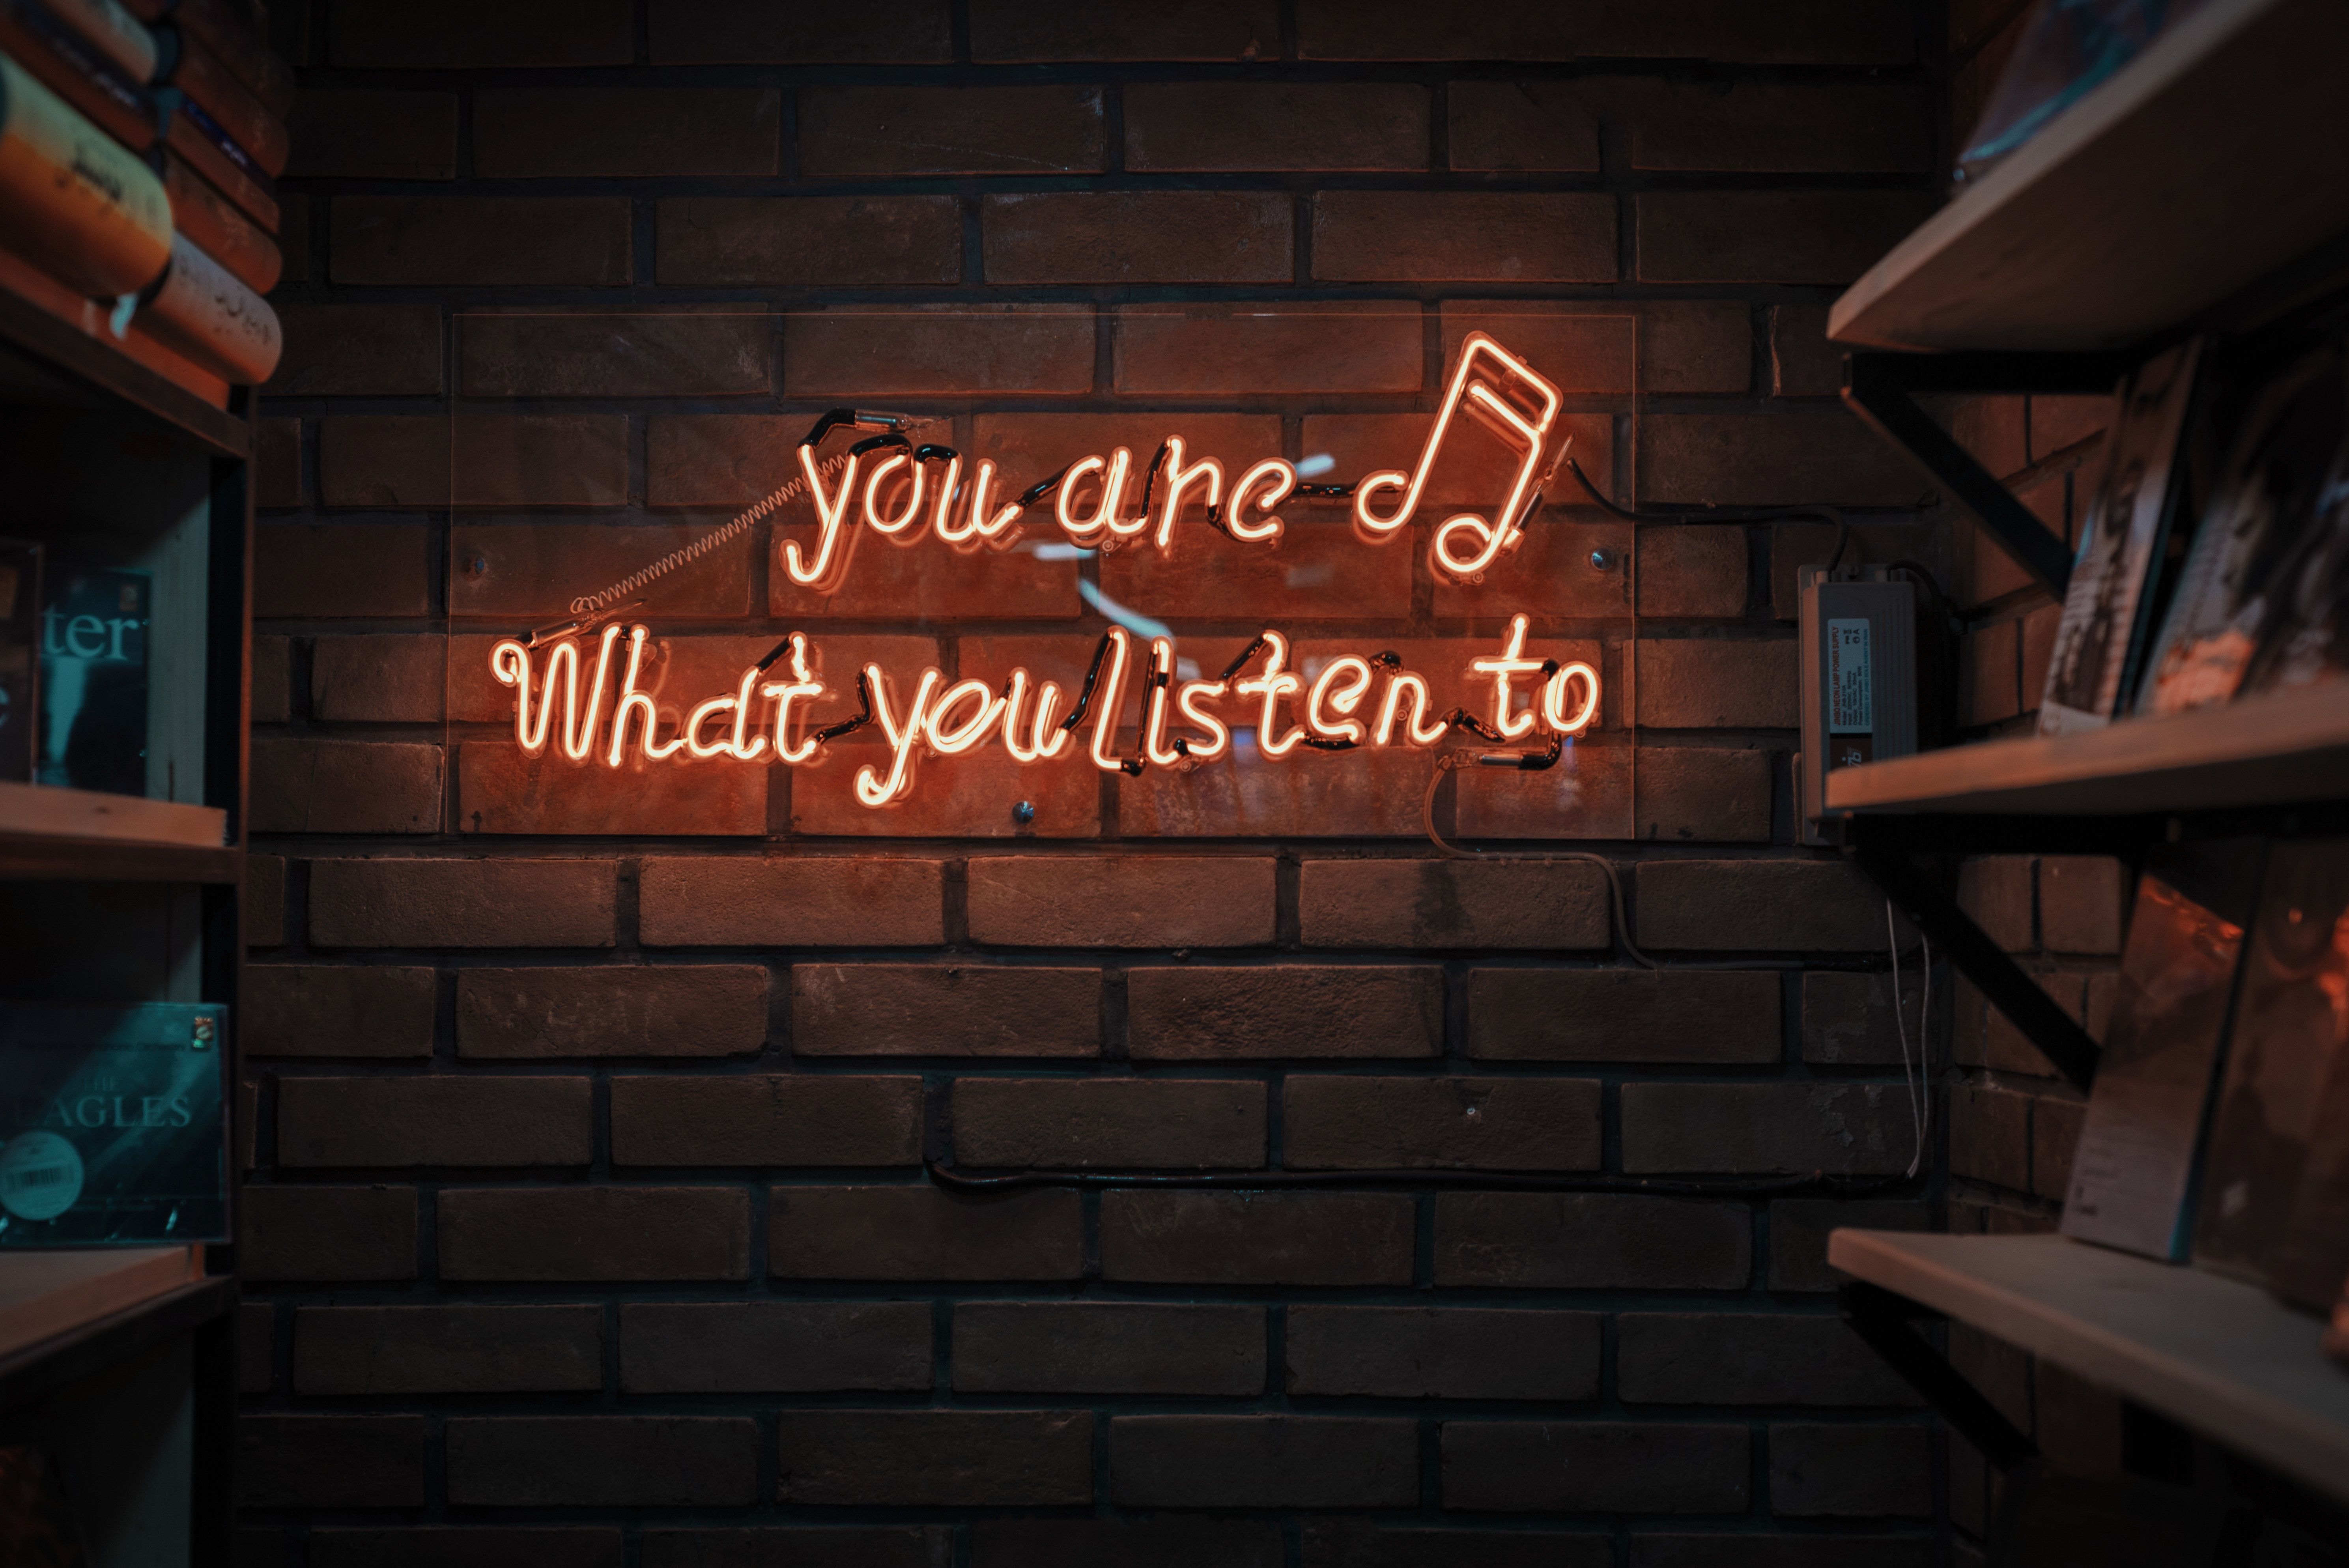 5955x3975 #brick wall, #signage, #neon sign, #sign, #orange, #red, #listen, #time, #crative, #shelves, #, #shop, #music, #note, #store, #life, #neon orange, #neon, #Creative Commons image, #audio, #wall. Mocah HD Wallpaper